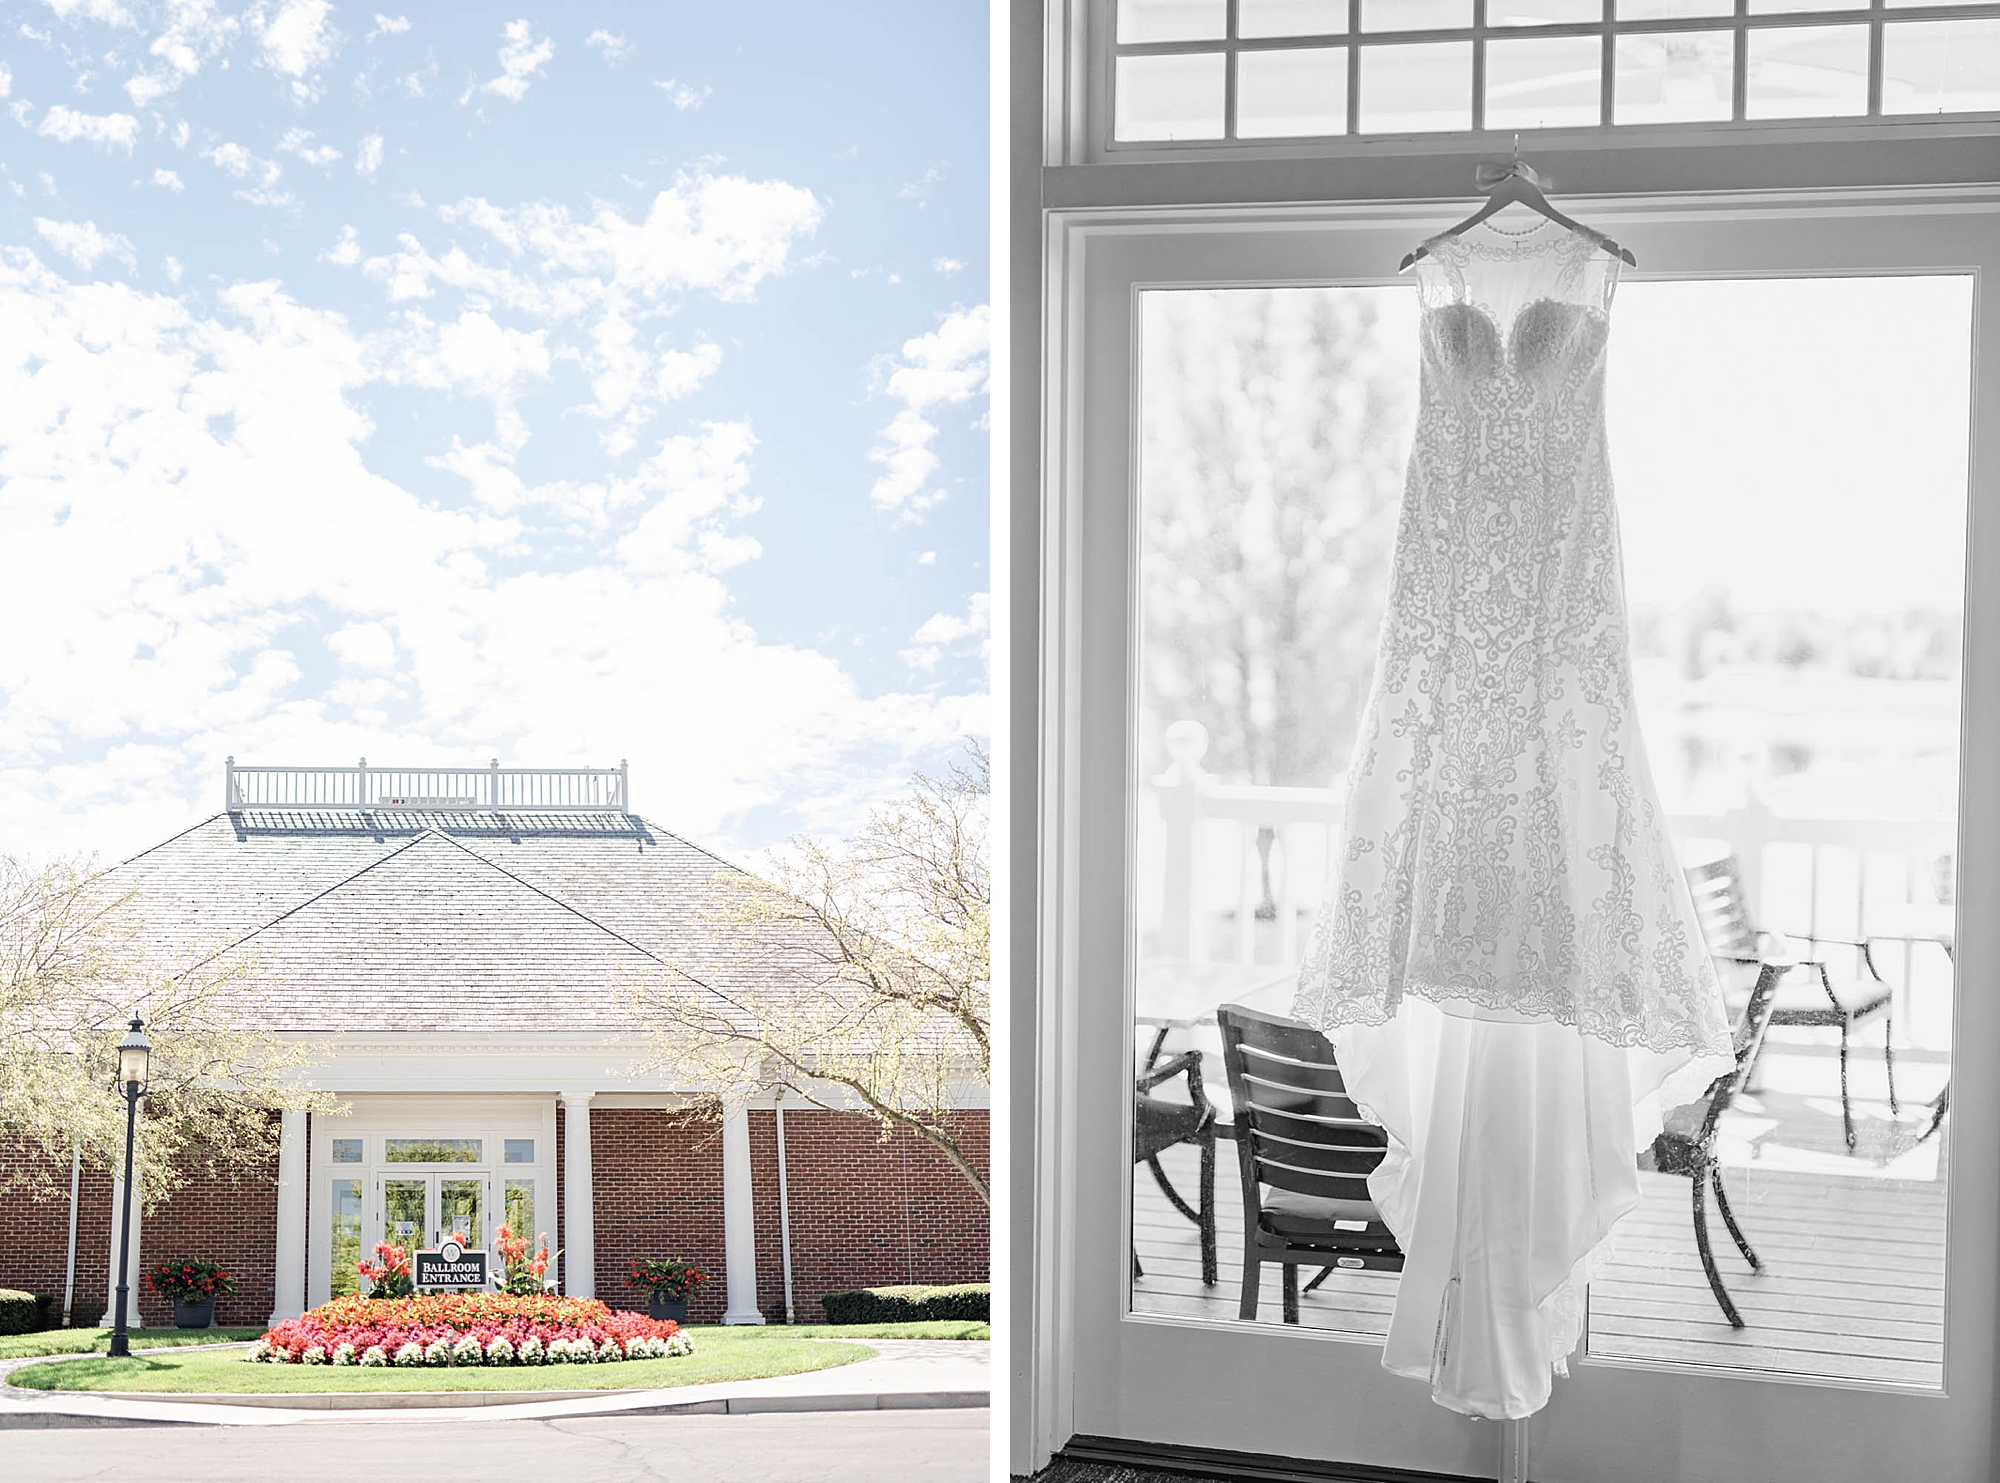 Wedgewood Golf & Country Club wedding day photographed by Stephanie Kase Photography